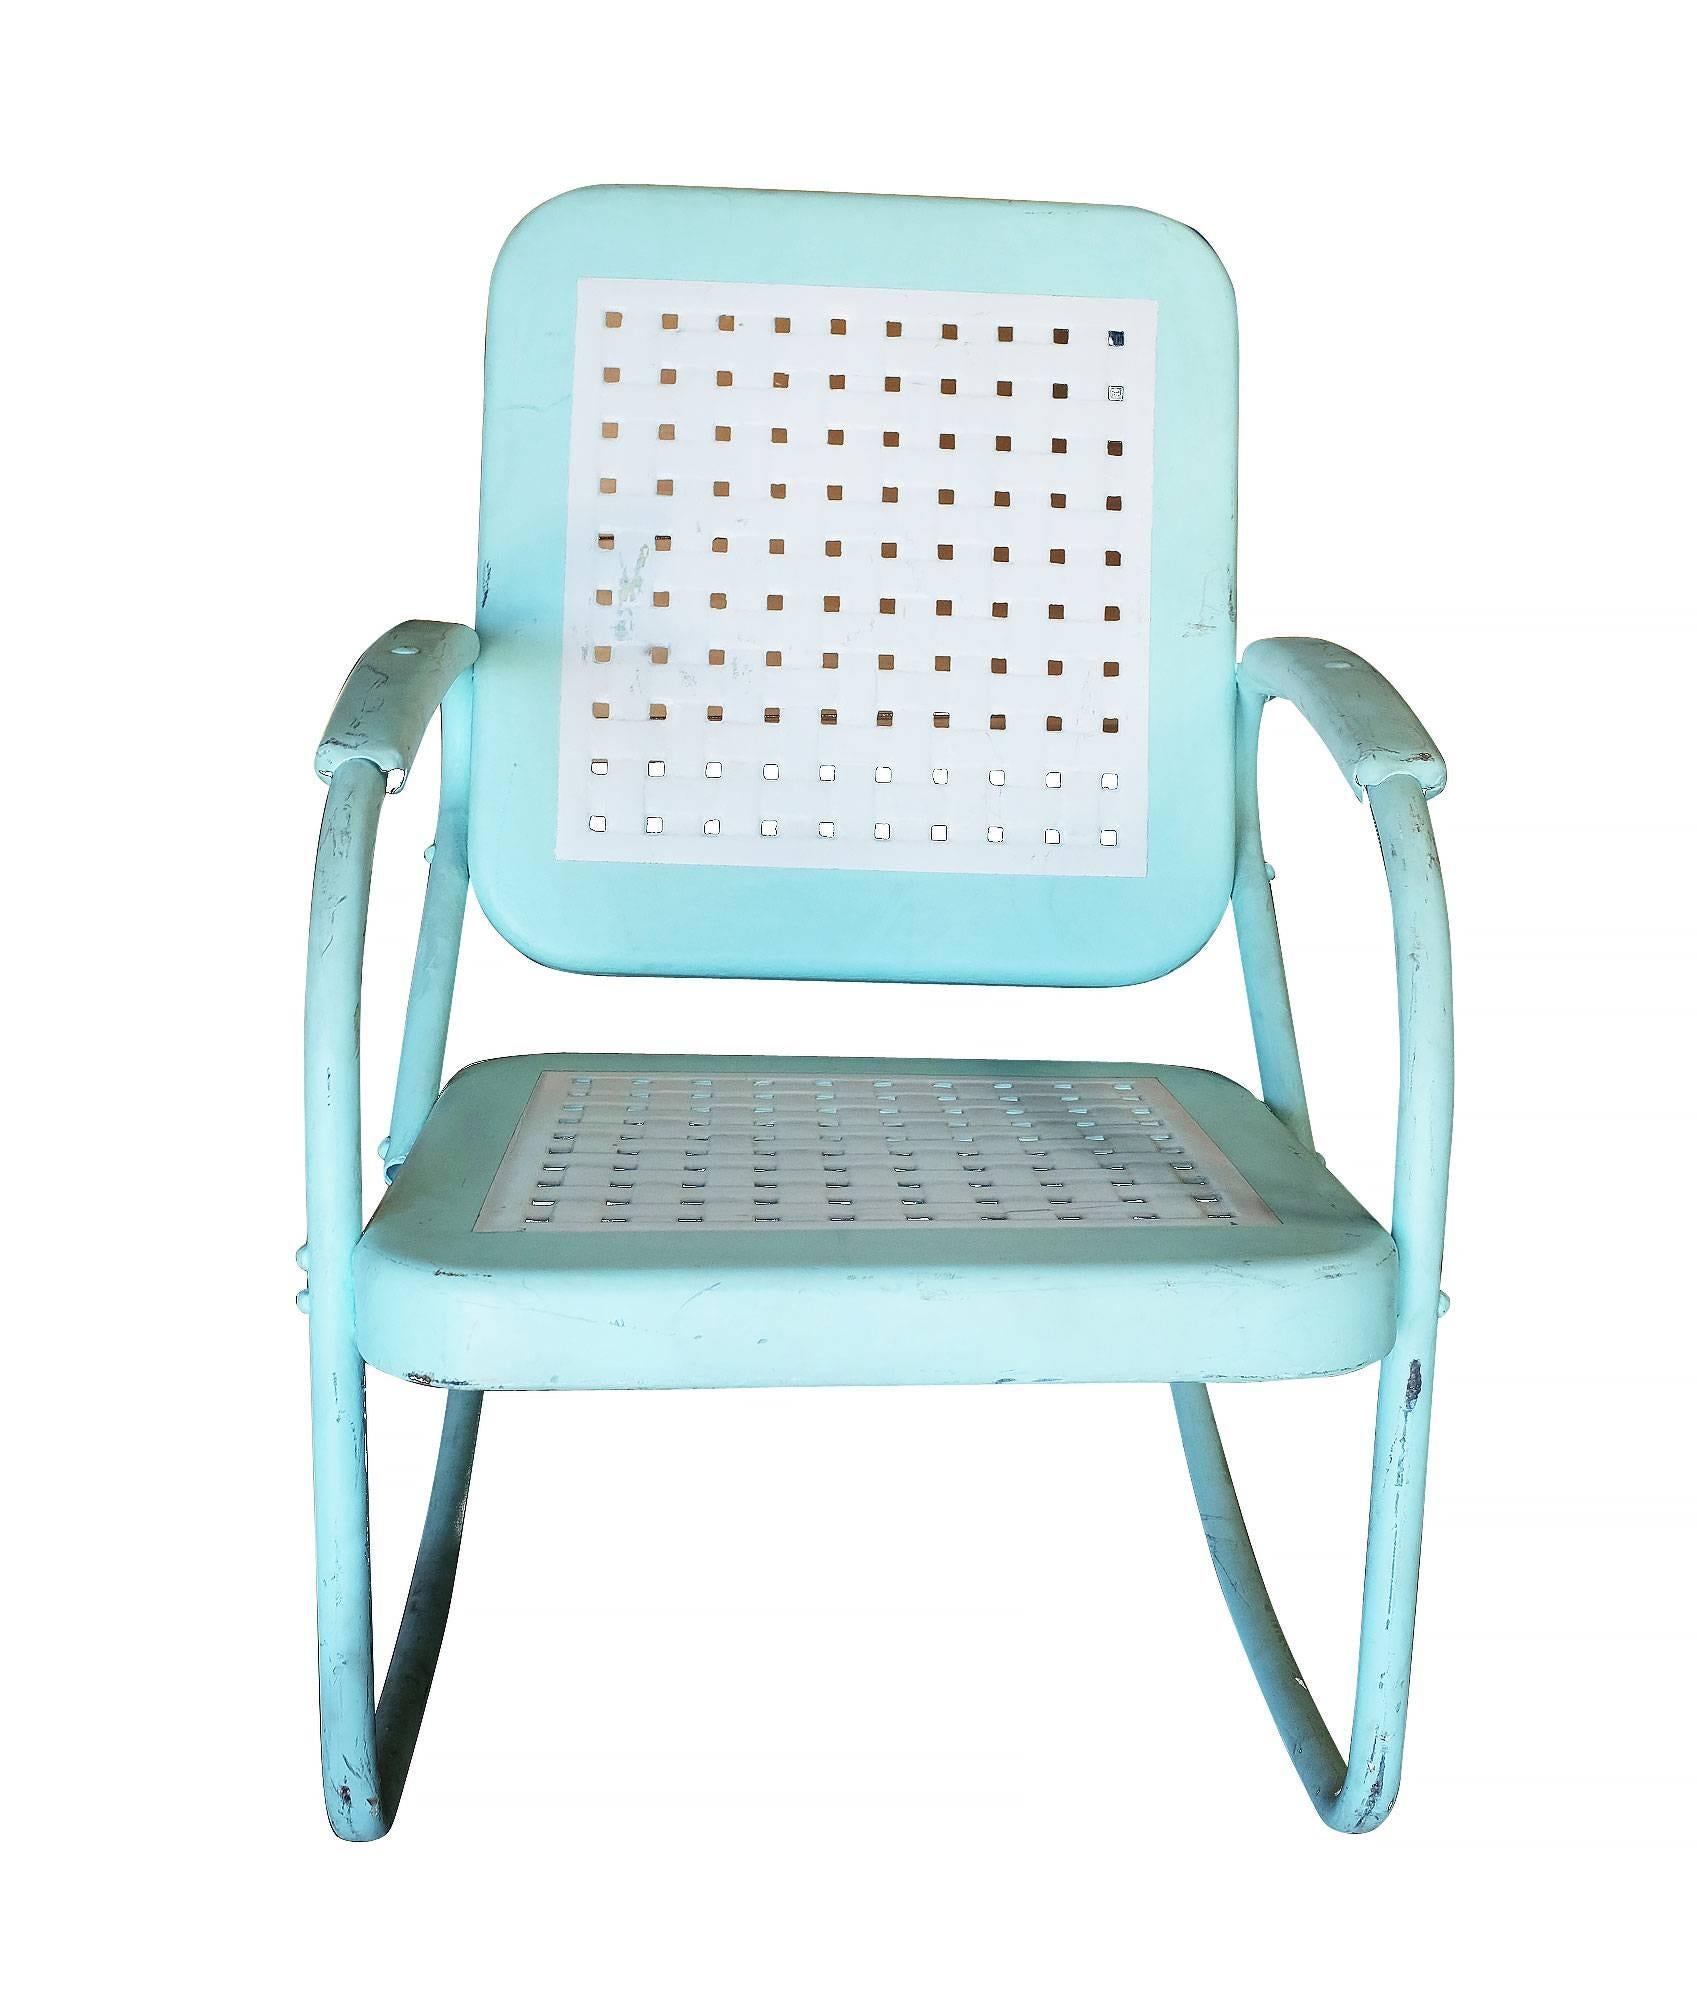 Midcentury Woodard style garden outdoor rocking chair made from a stamped sheet metal seat and a tubular steel frame. There is a unique woven basket design along the top of each seat.